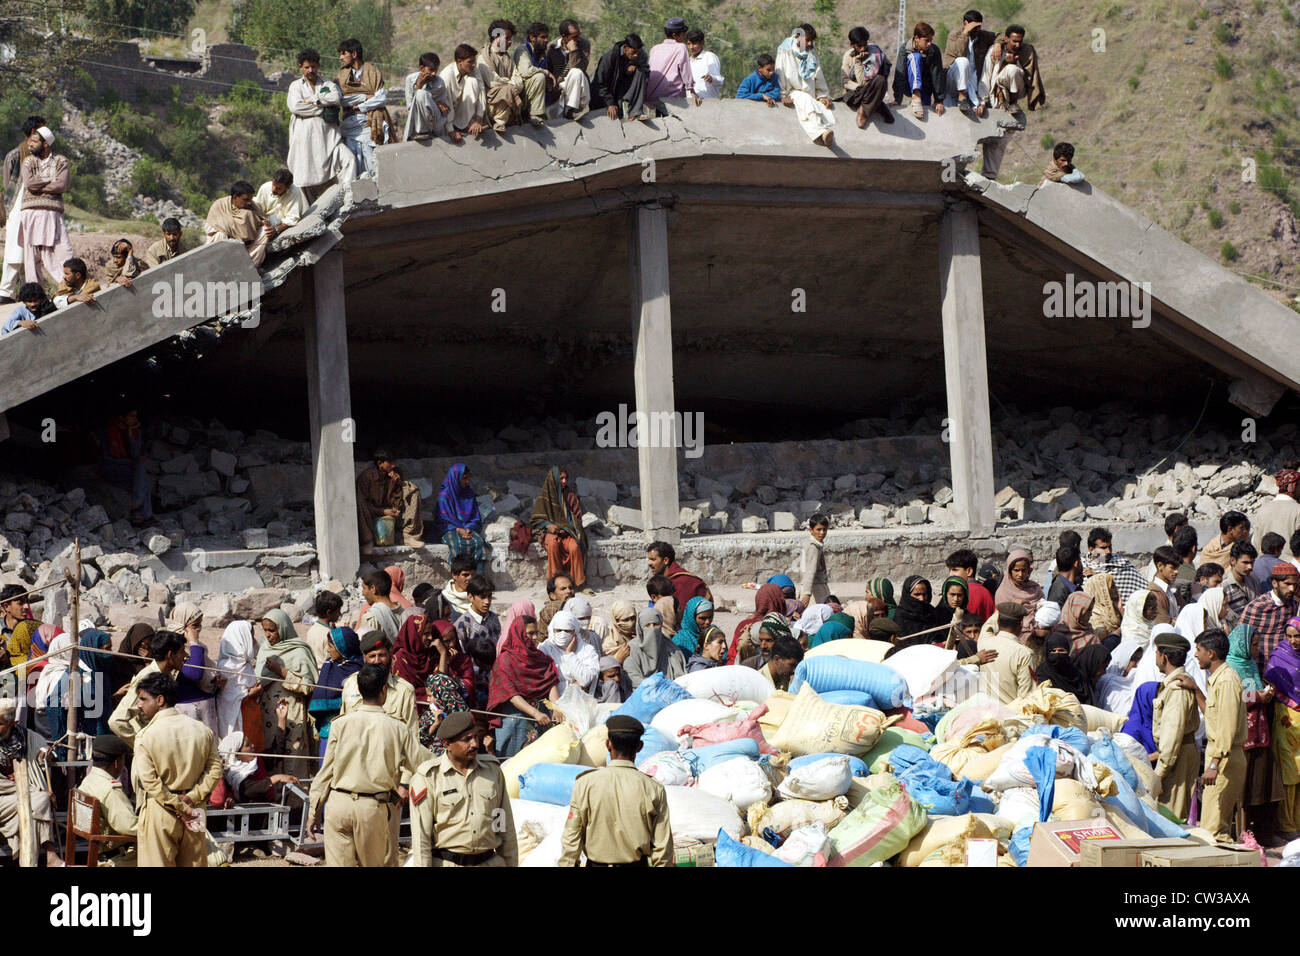 Hilfsgueterverteilung to earthquake victims in Pakistan Stock Photo